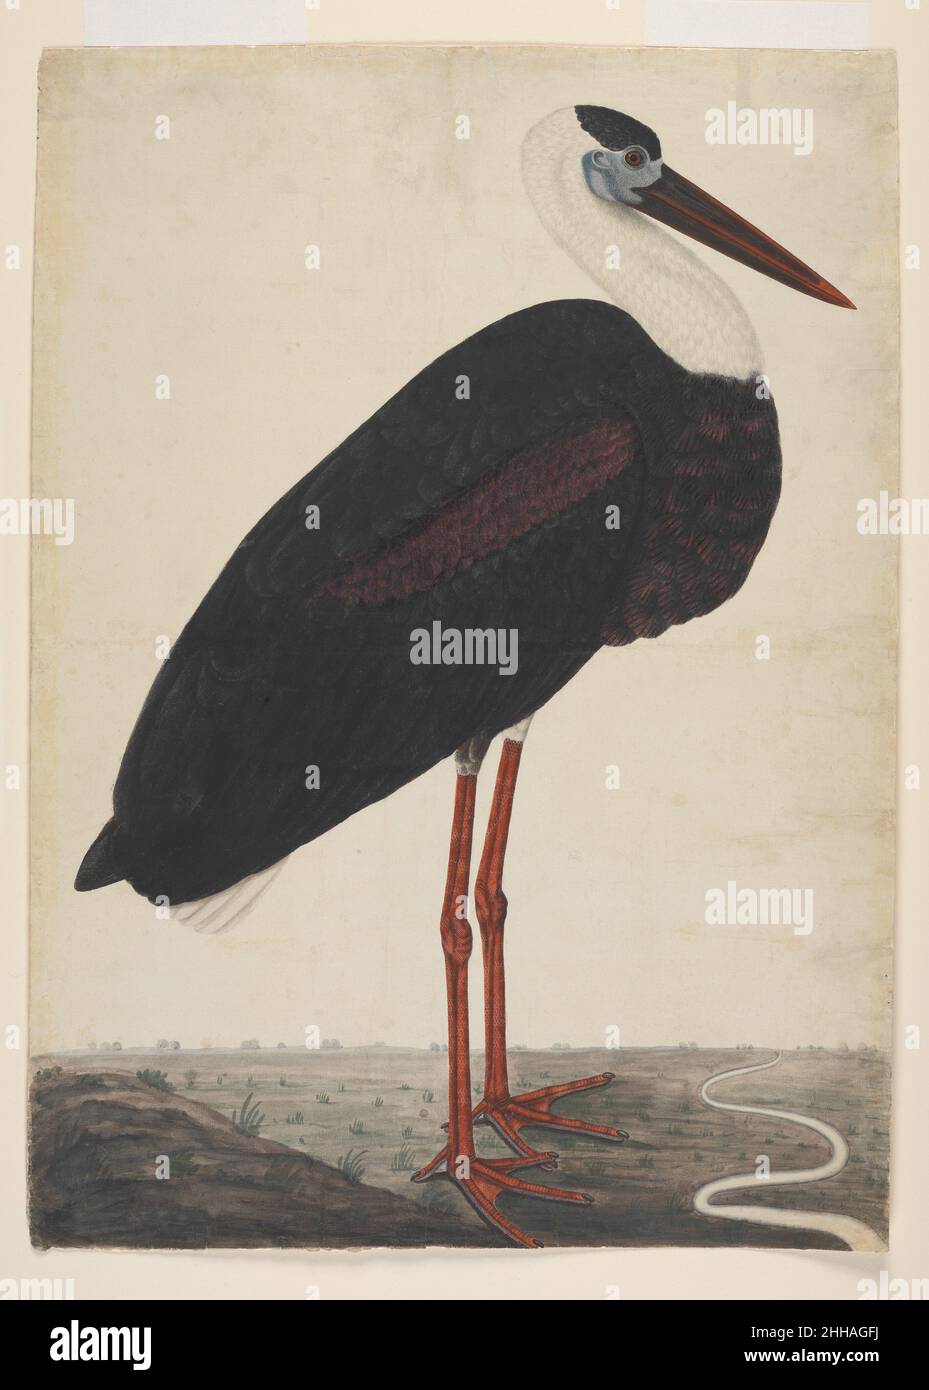 Black Stork in a Landscape ca. 1780 The distinctive white neck feathers, purple-streaked wings, and red-tinged beak of this bird identify it as a Woolly-Necked Stork (Ciconia episcopus). The meandering watercourse on the right could be a reference to the riverine areas where such birds are typically found, but the particular fashion in which the landscape is depicted seems to be a distinguishing characteristic of the larger set of bird paintings to which this work belonged. This set may have once comprised over 600 paintings, the patronage of which has been attributed to Claude Martin, who ser Stock Photo